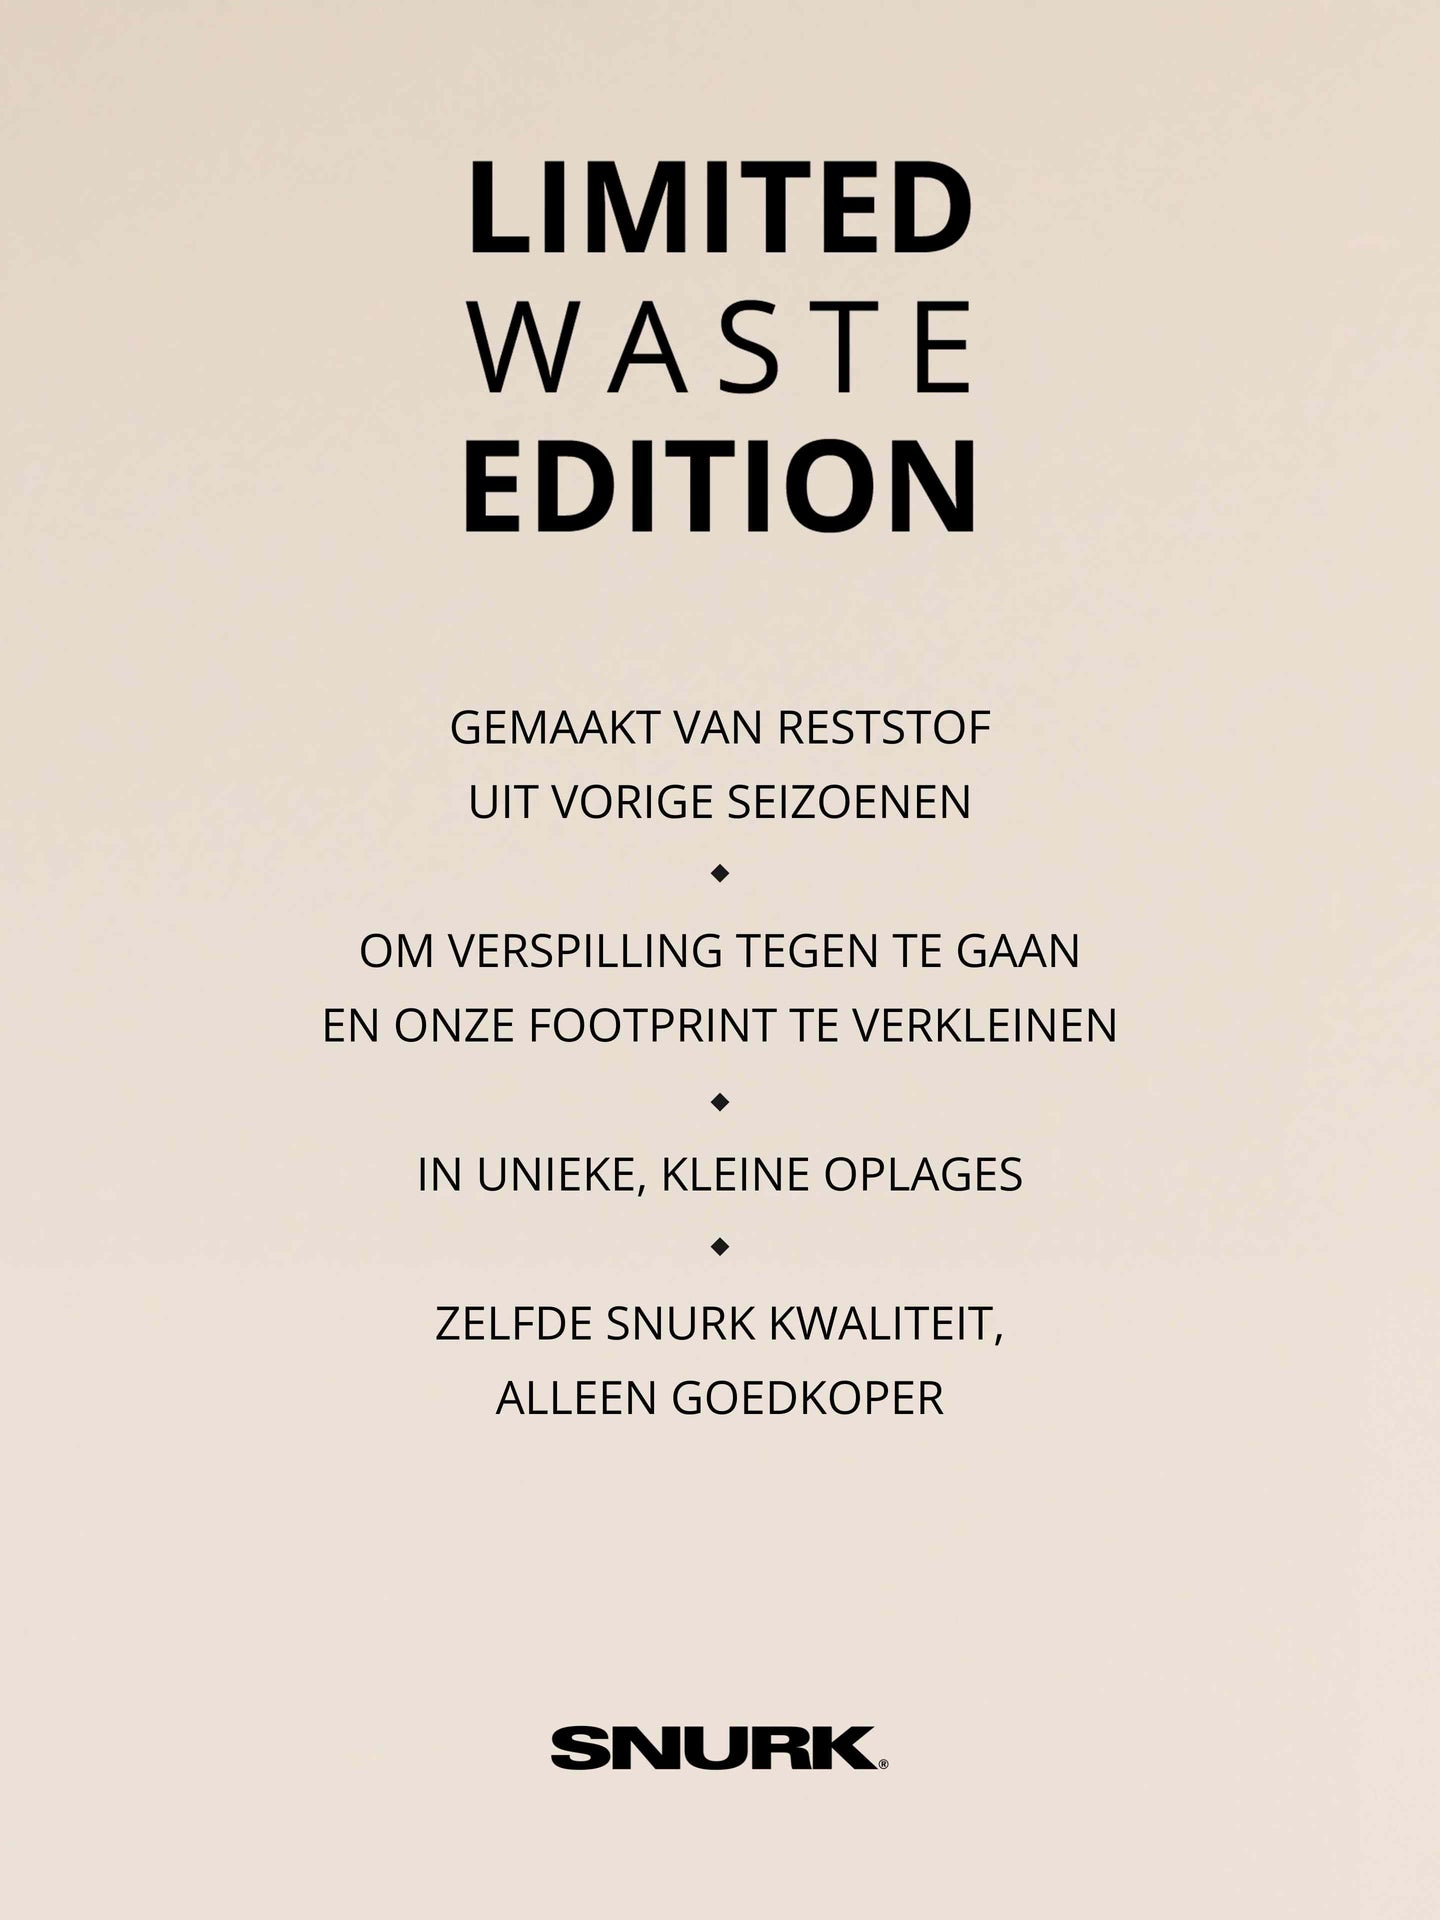 Explainer of The Limited Waste Editions by snurk